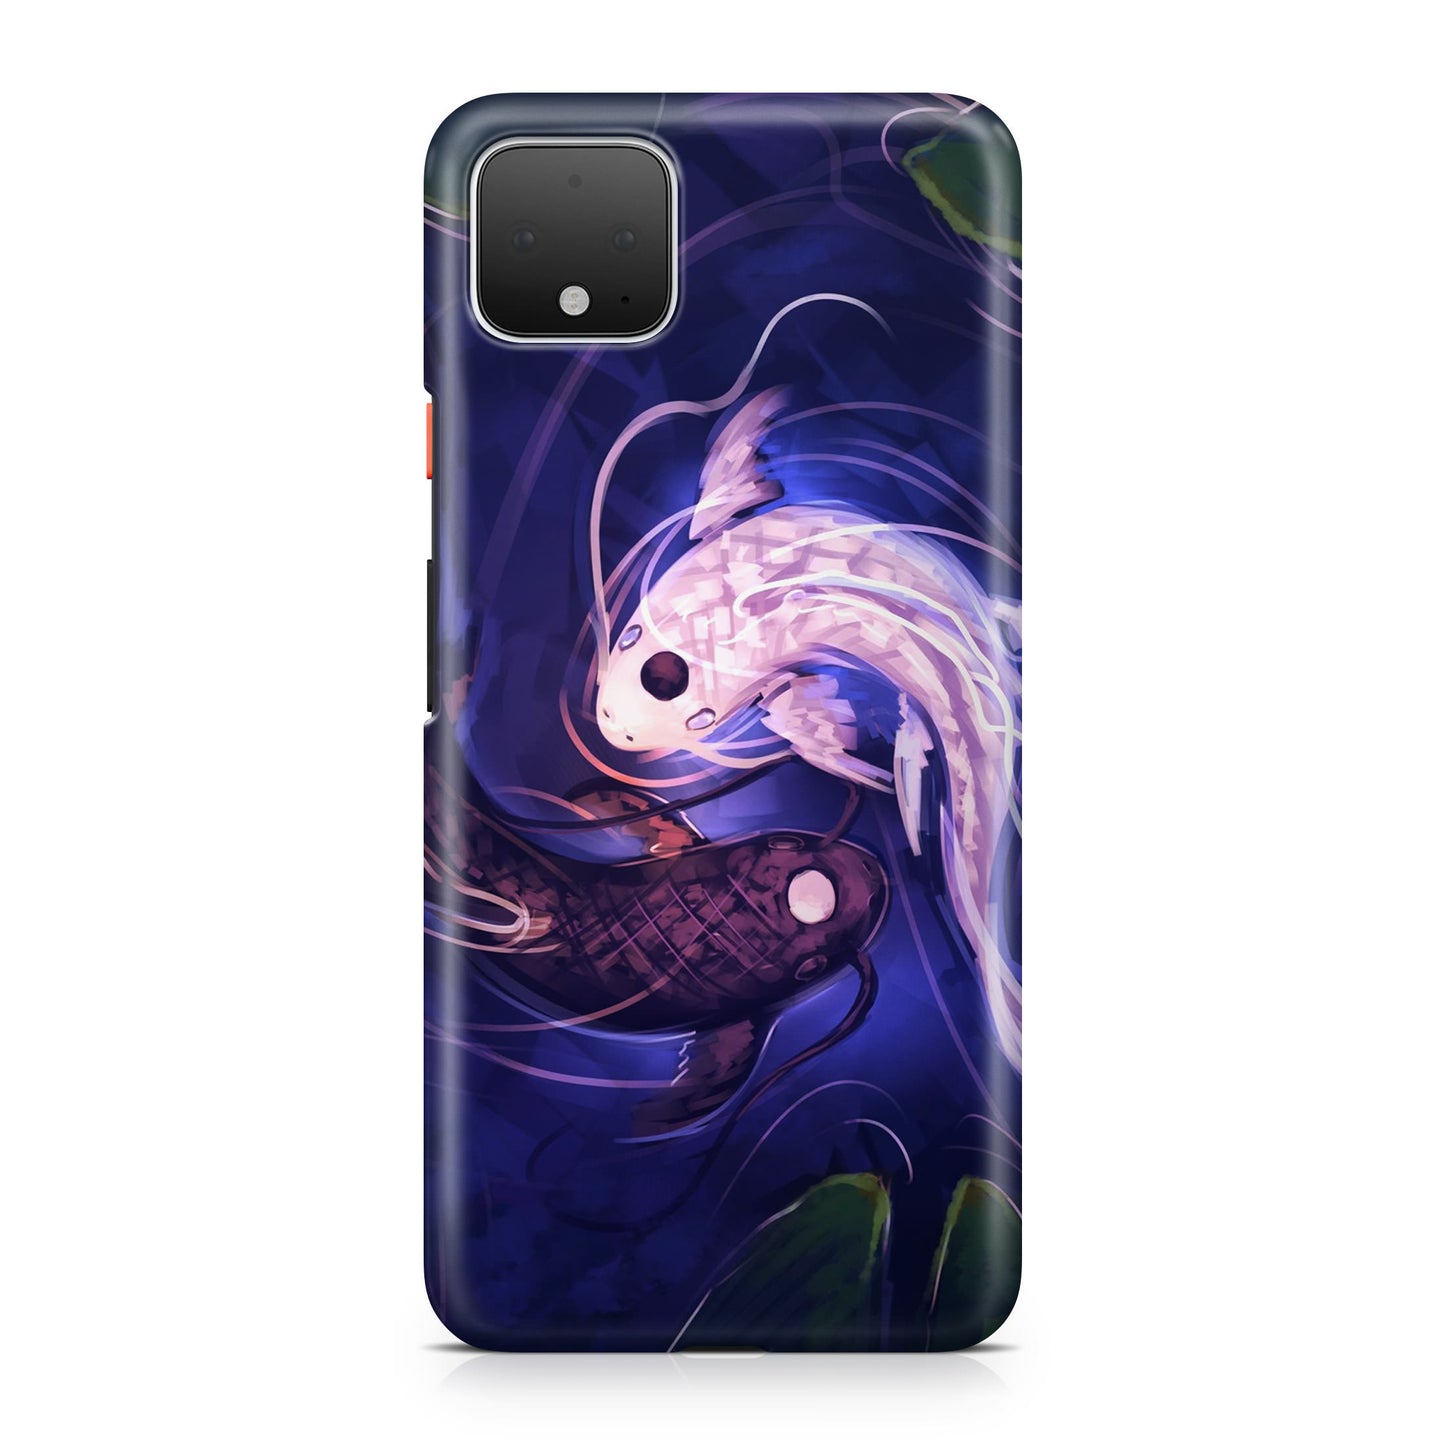 Yin And Yang Fish Avatar The Last Airbender Google Pixel 4 / 4a / 4 XL Case